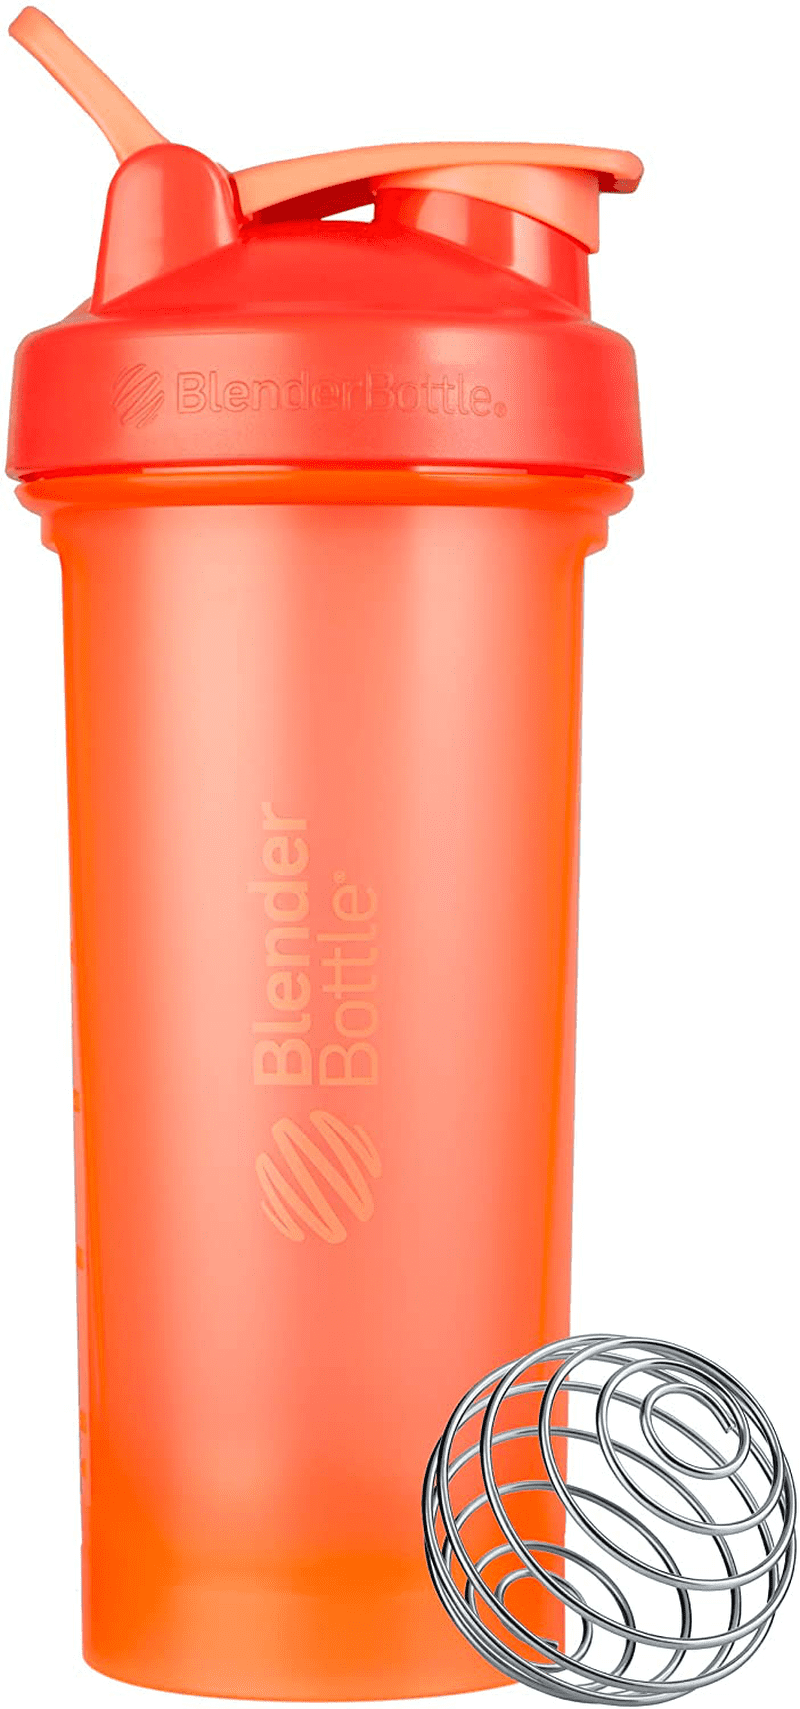 Ryno Power Blender Bottle Clear 28-Ounce - Orange Cycle